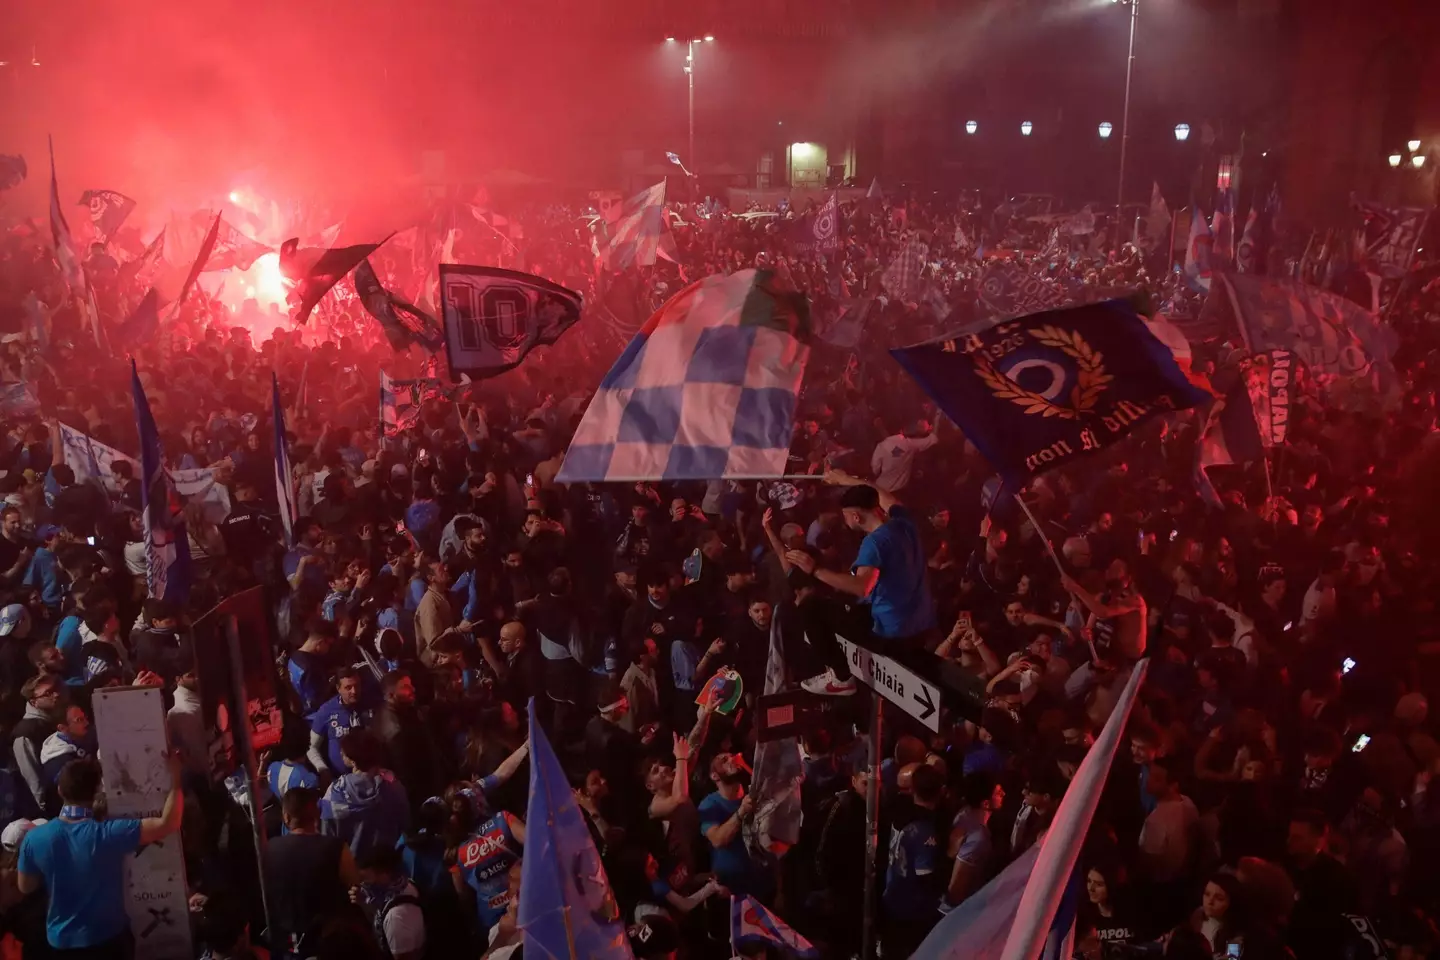 Napoli fans took to the streets to celebrate their first Scudetto in 33 years.